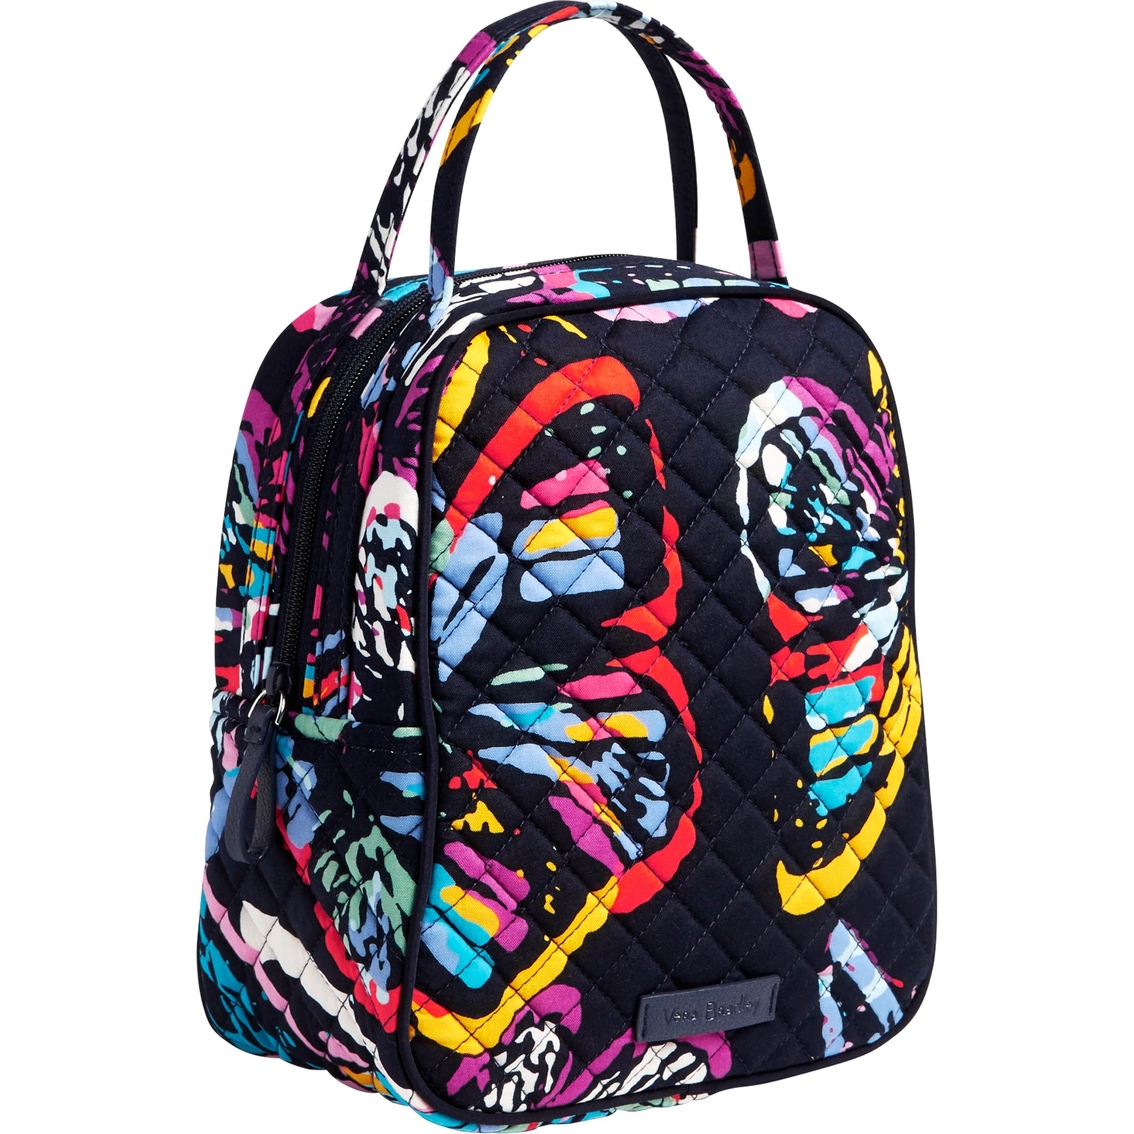 Vera Bradley Iconic Lunch Bunch, Butterfly Flutter - Image 2 of 3